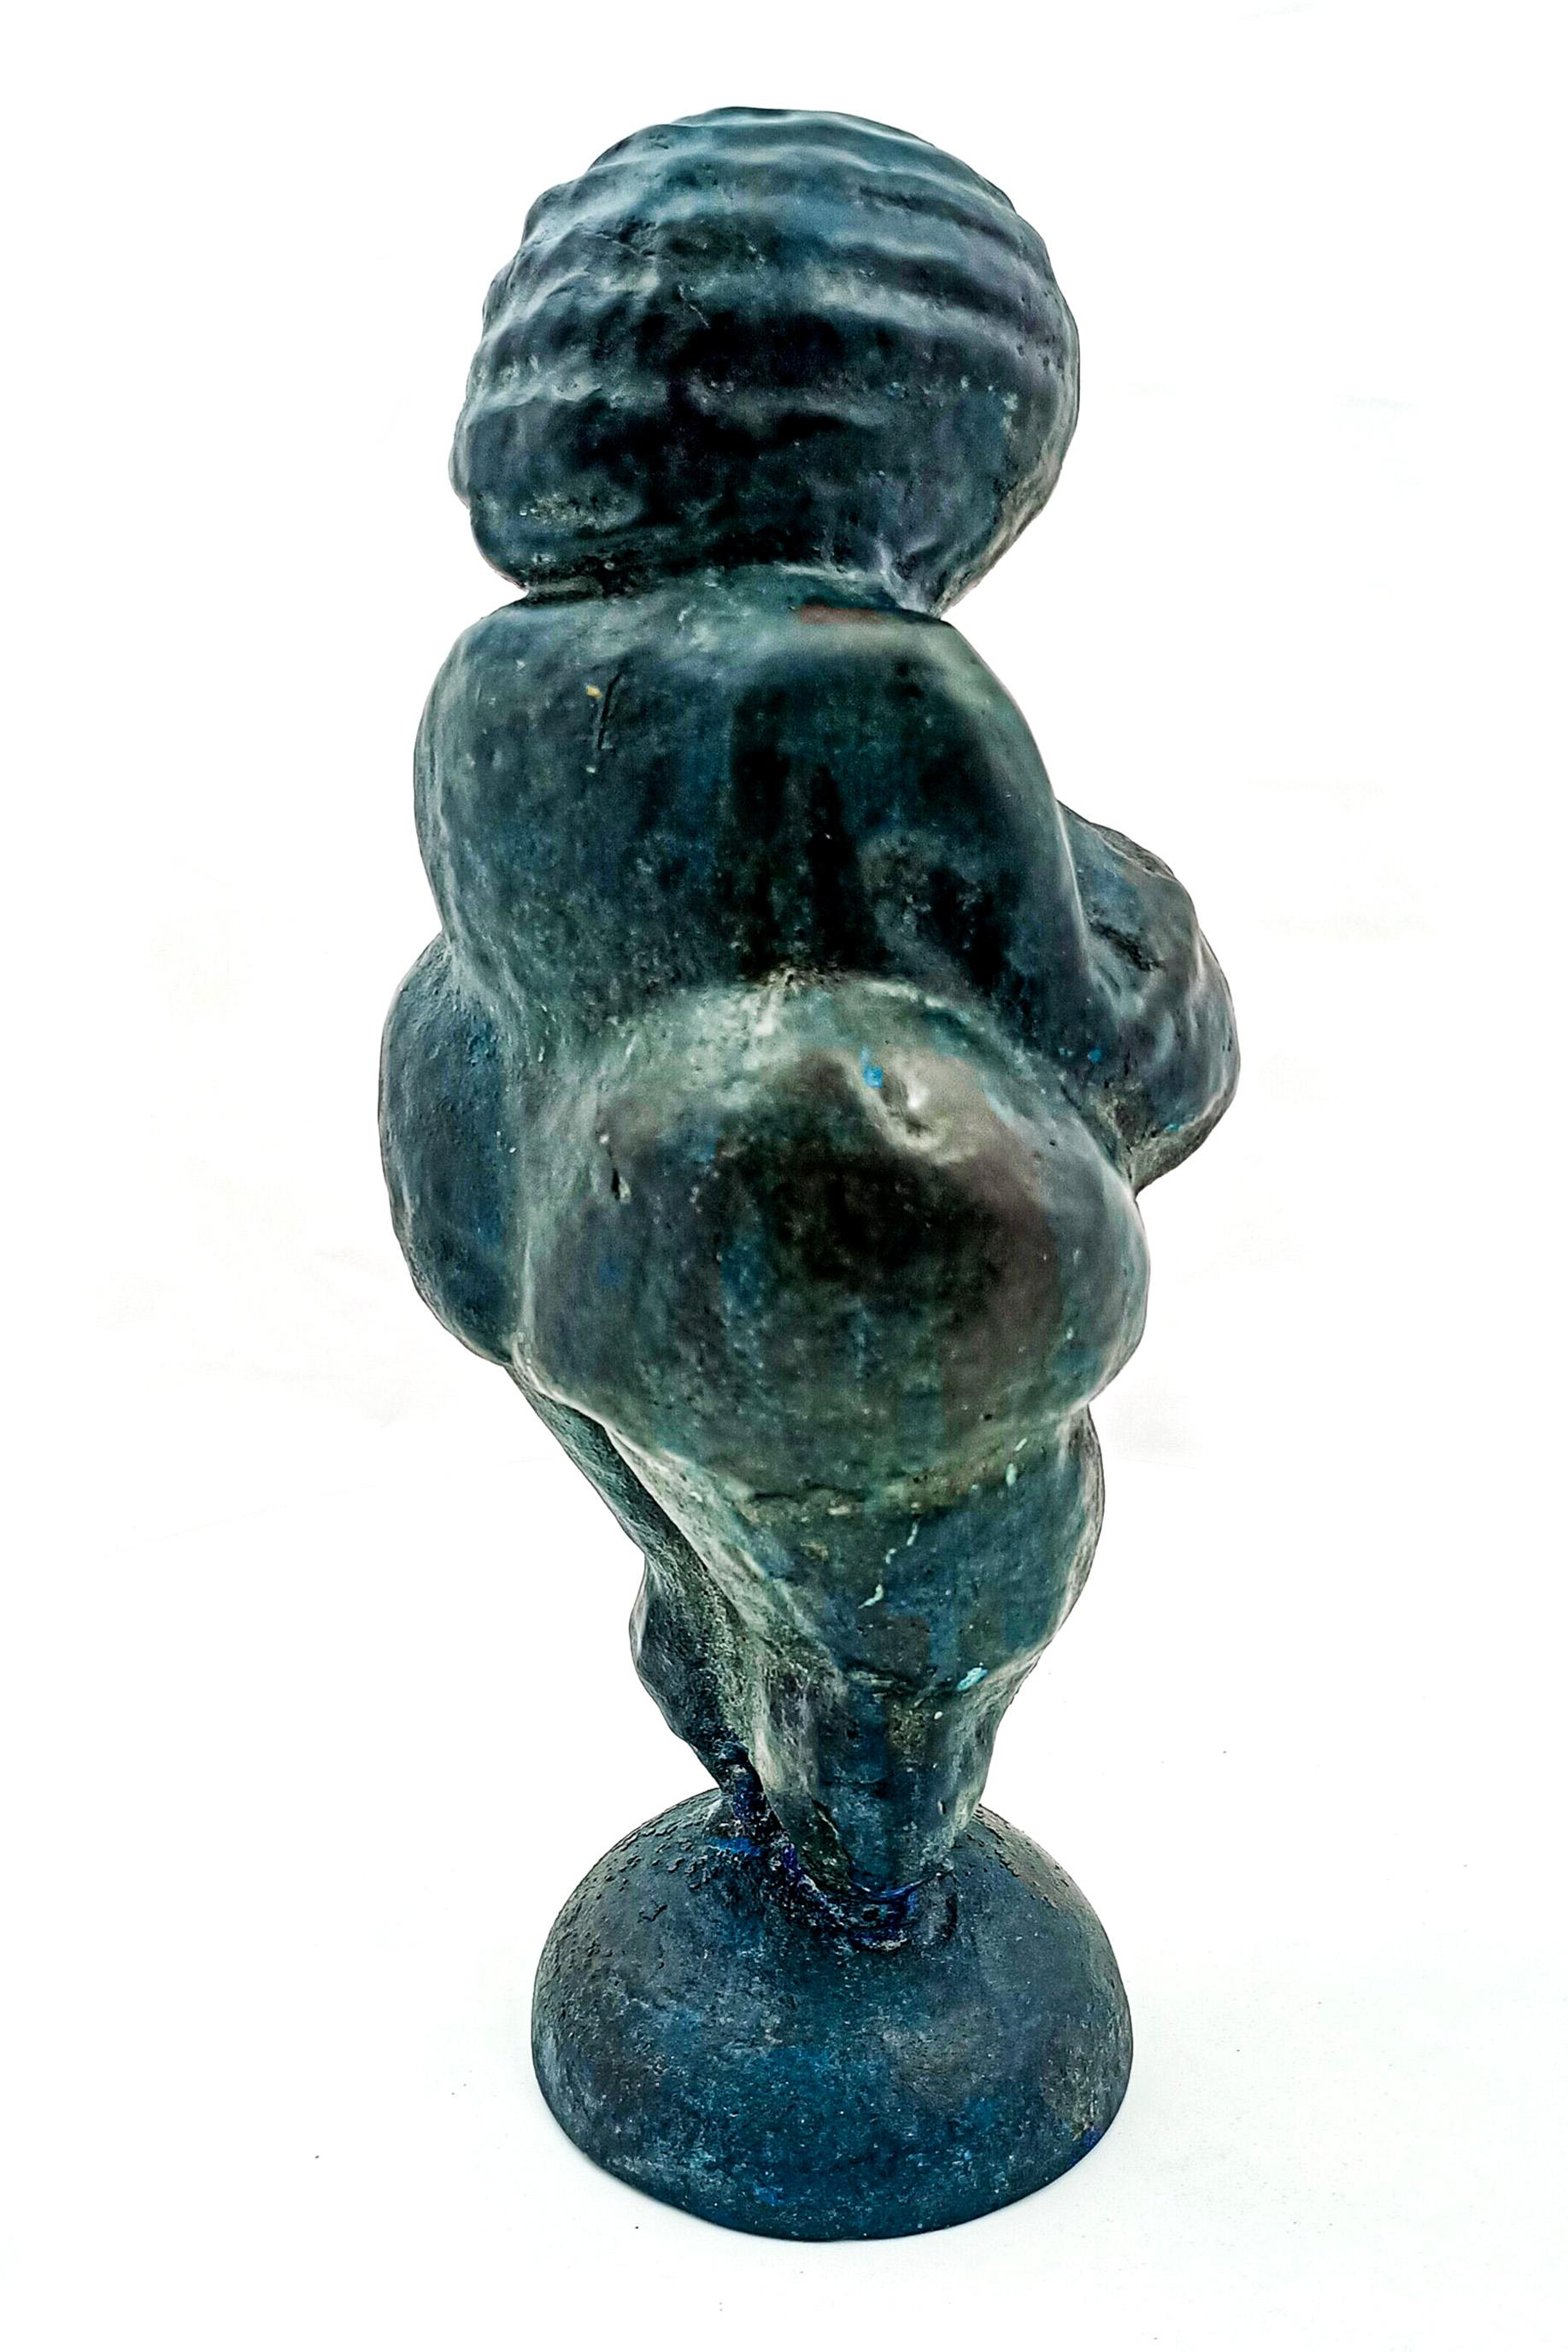 Sculpture based on original Venus figurine estimated to have been made around 25,000-30,000 years ago.

Artist: Unknown
Name: Venus of Willendorf
Year of creation: 2010
Techique: patinated bronze
Dimentions: (H) 33 x (W) 16 x (D) 15 cm
Edition: